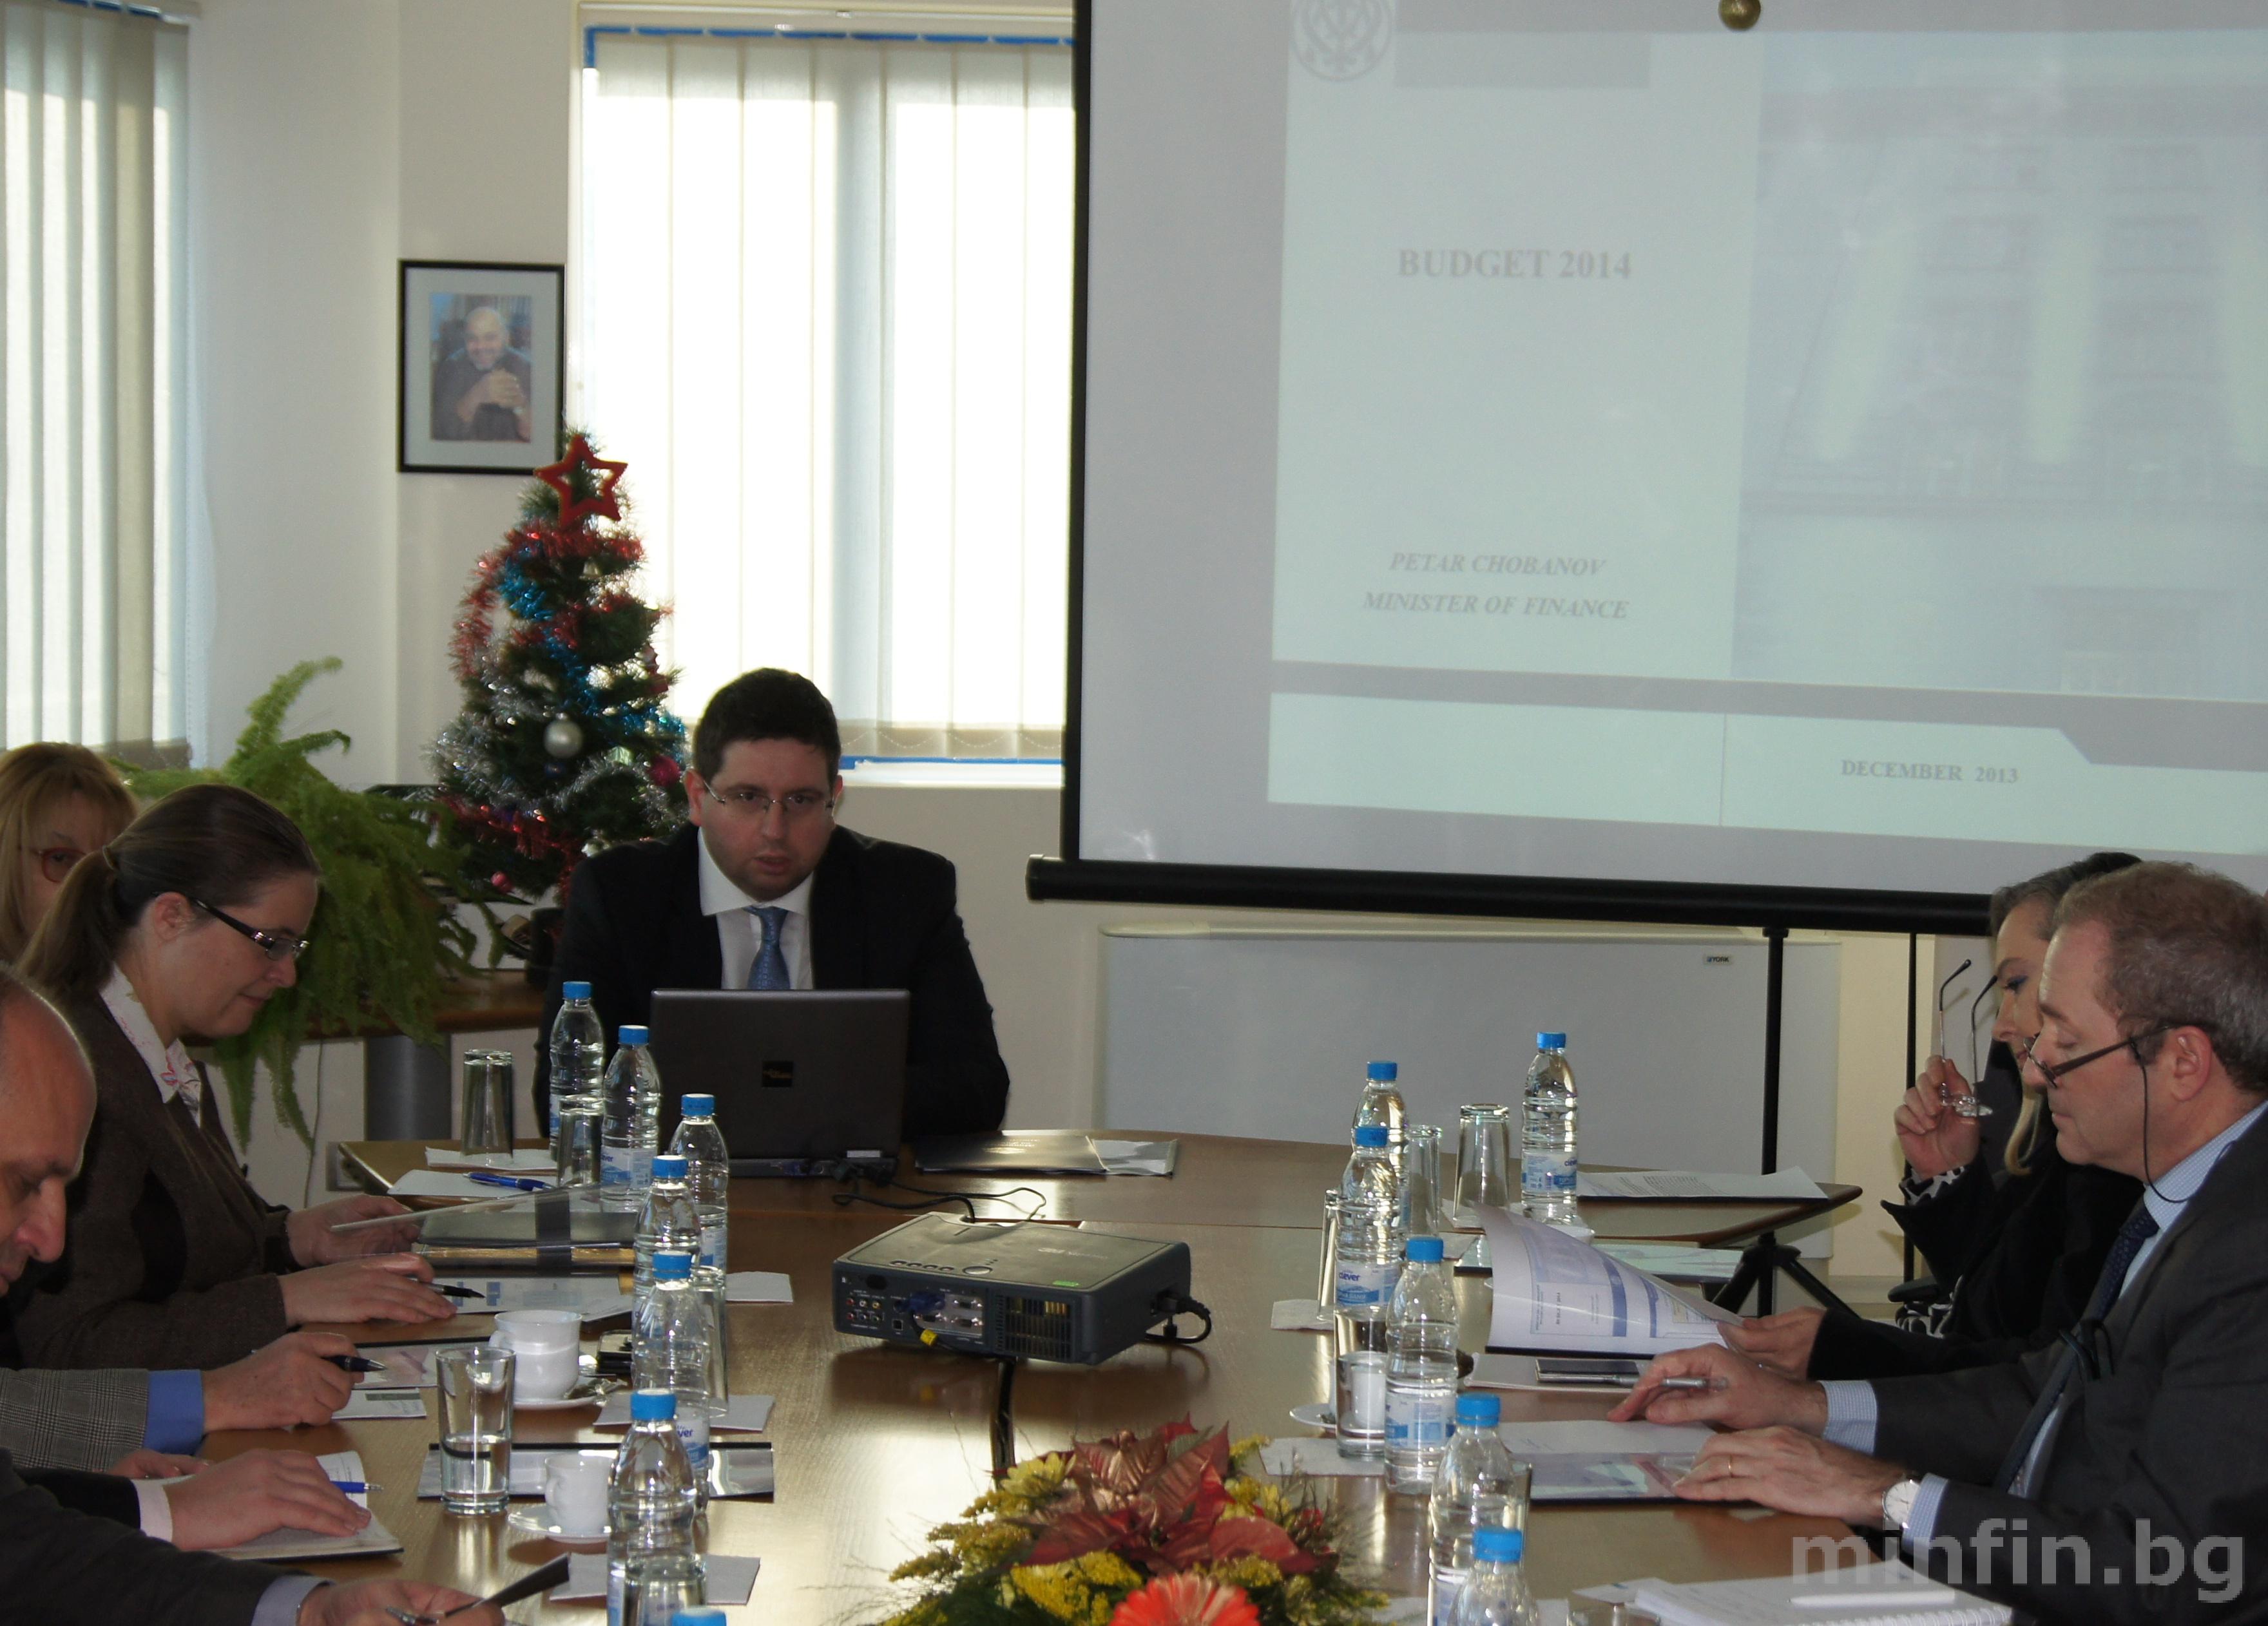 MINISTER OF FINANCE PETAR CHOBANOV PRESENTED 2014 BUDGET AND UNDERLYING ECONOMY-GALVANIZING POLICIES TO ECONOMIC DIPLOMATS